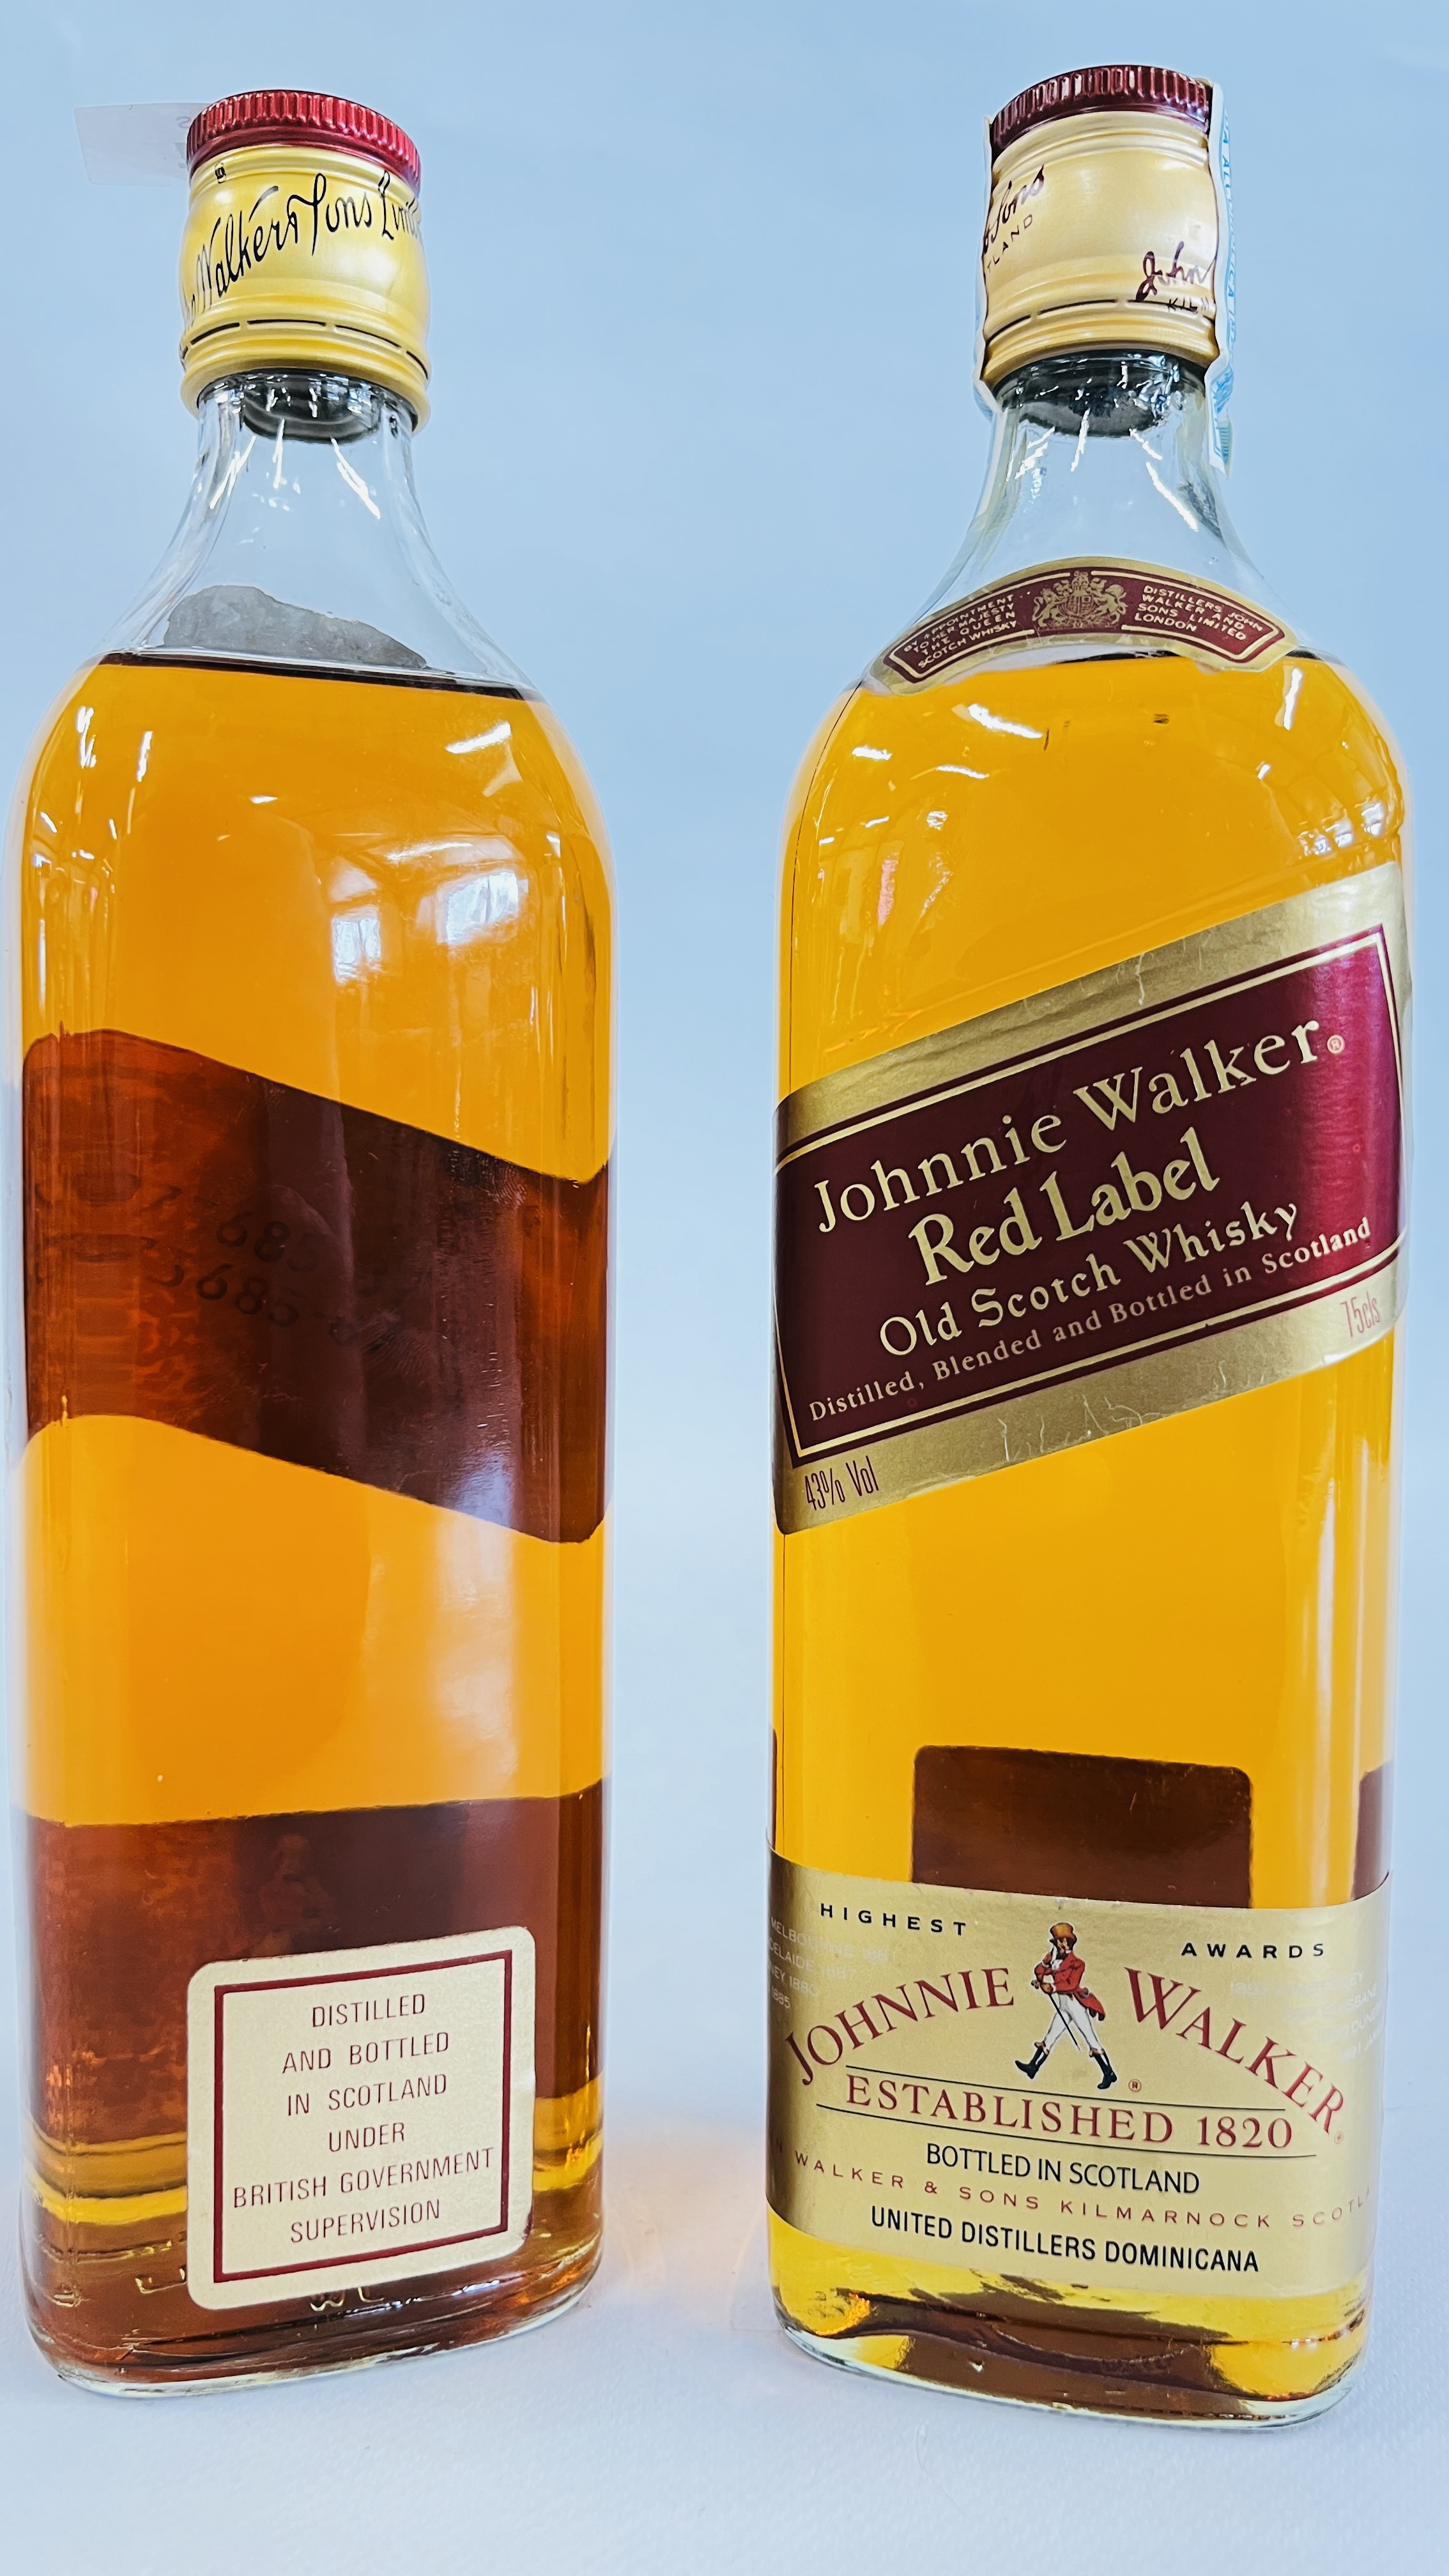 2 X 75CL BOTTLES OF "JOHNNIE WALKER" RED LABEL OLD SCOTCH WHISKY. - Image 2 of 4